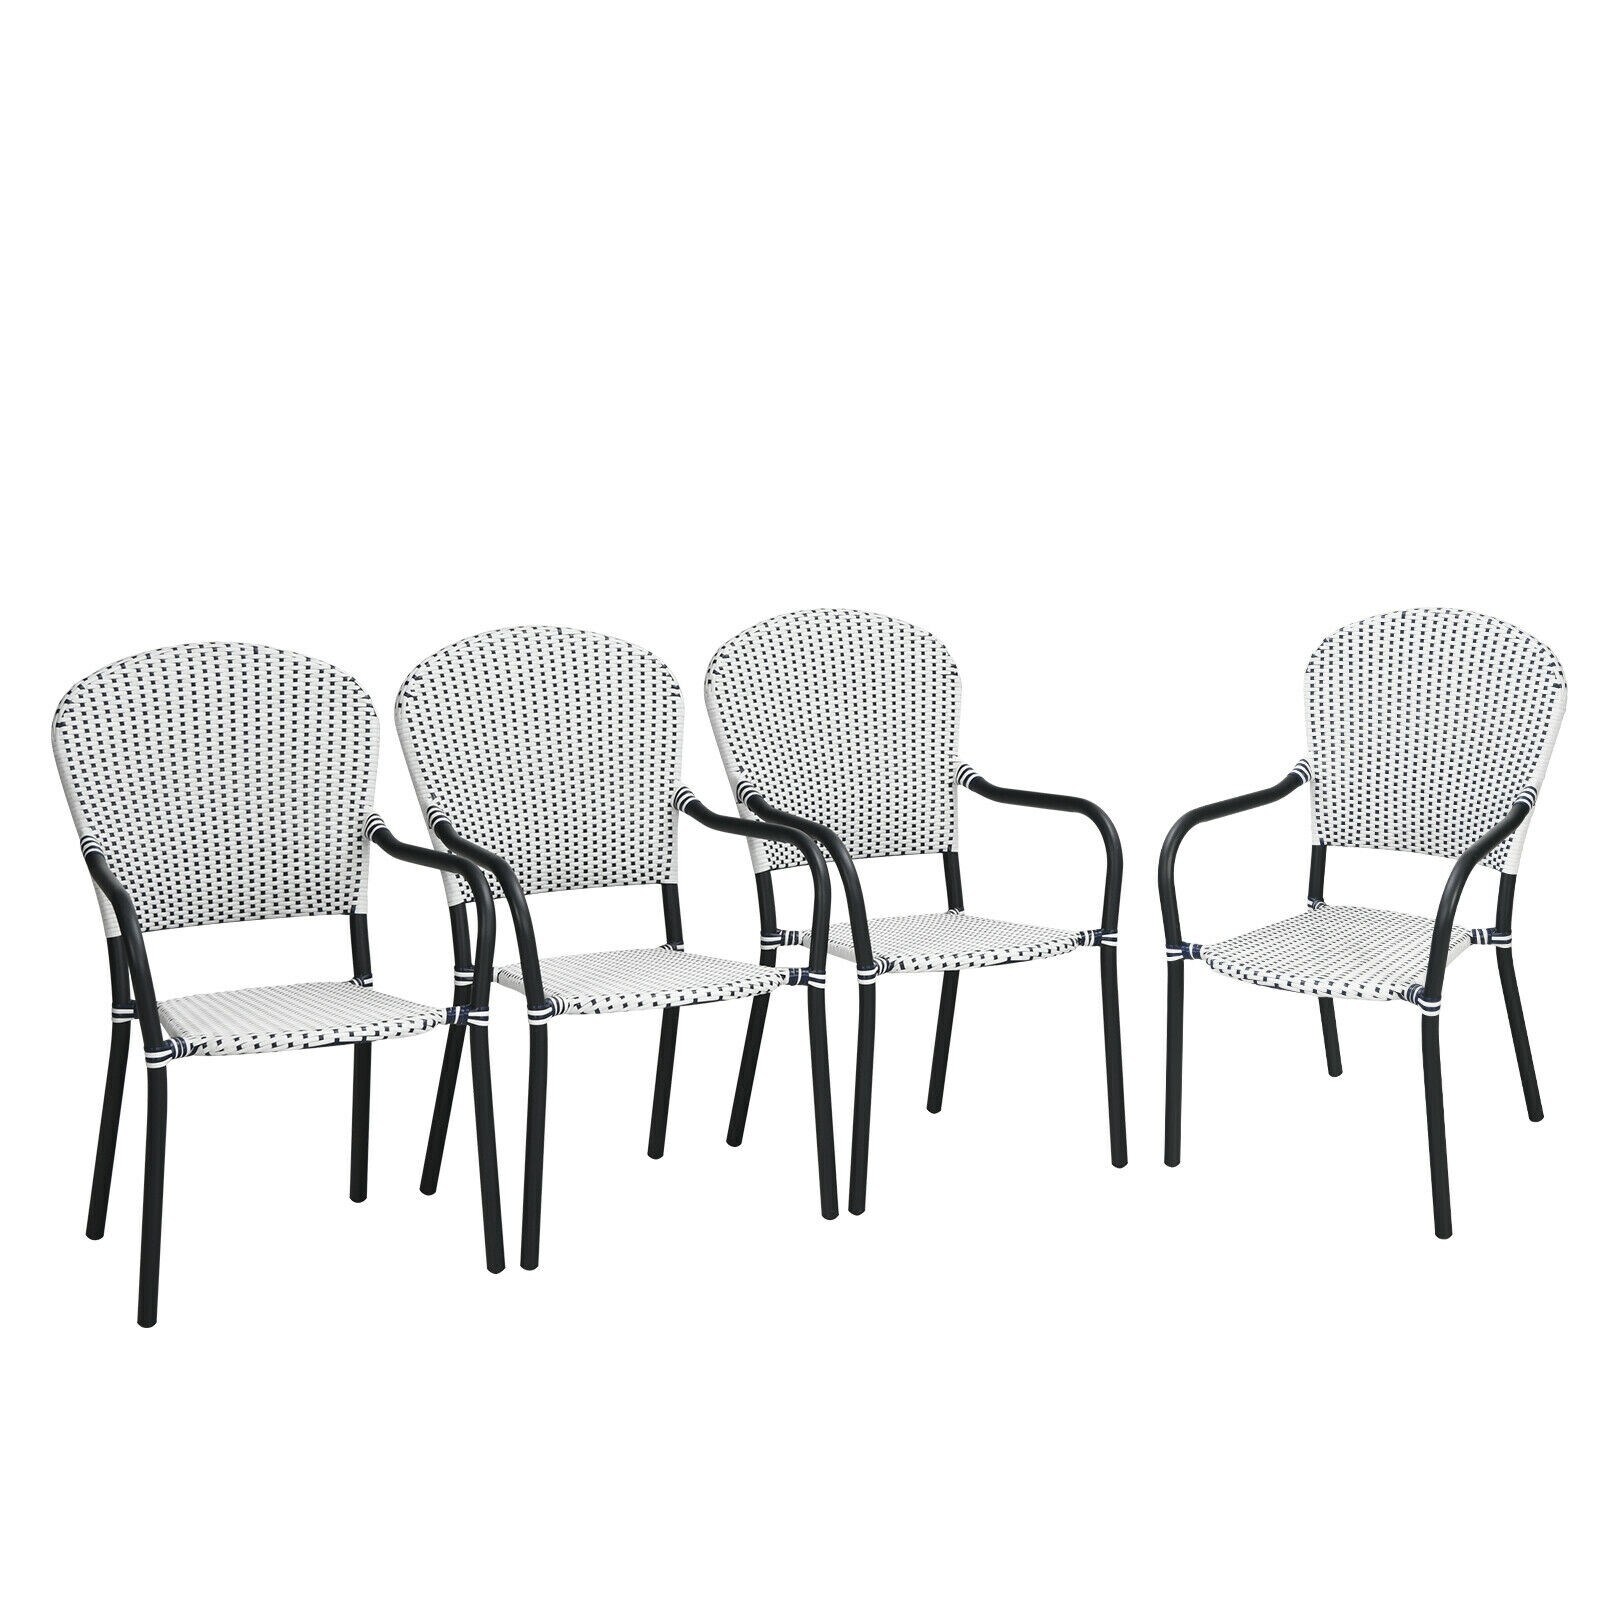 Set Of 4 Patio Rattan Stackable Dining Chair With Armrest For Garden 24" X 22.5" X 36" (l X W X H)